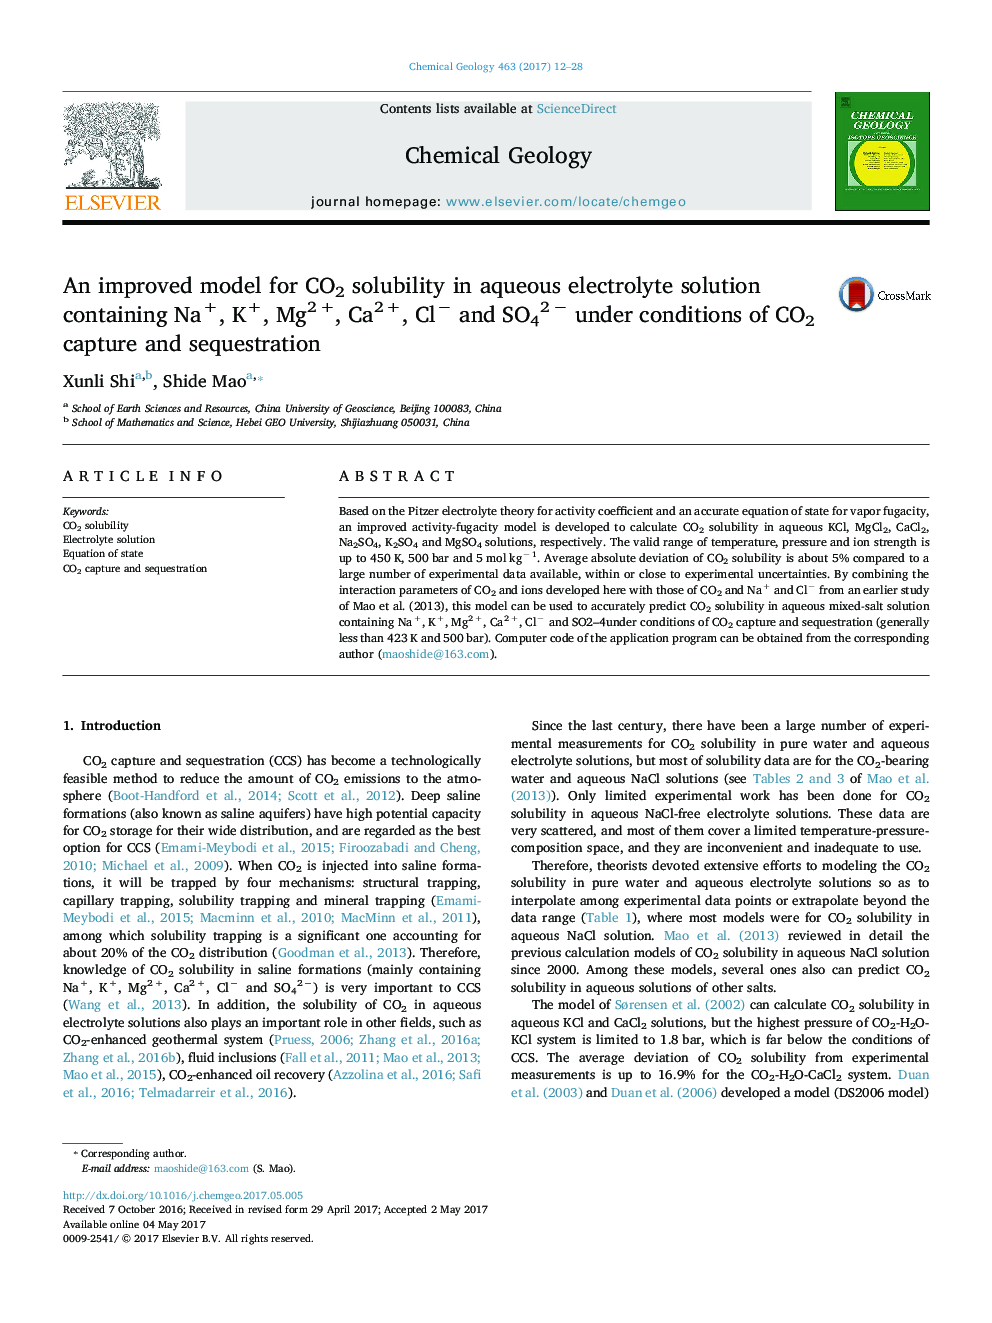 An improved model for CO2 solubility in aqueous electrolyte solution containing Na+, K+, Mg2Â +, Ca2Â +, Clâ and SO42Â â under conditions of CO2 capture and sequestration